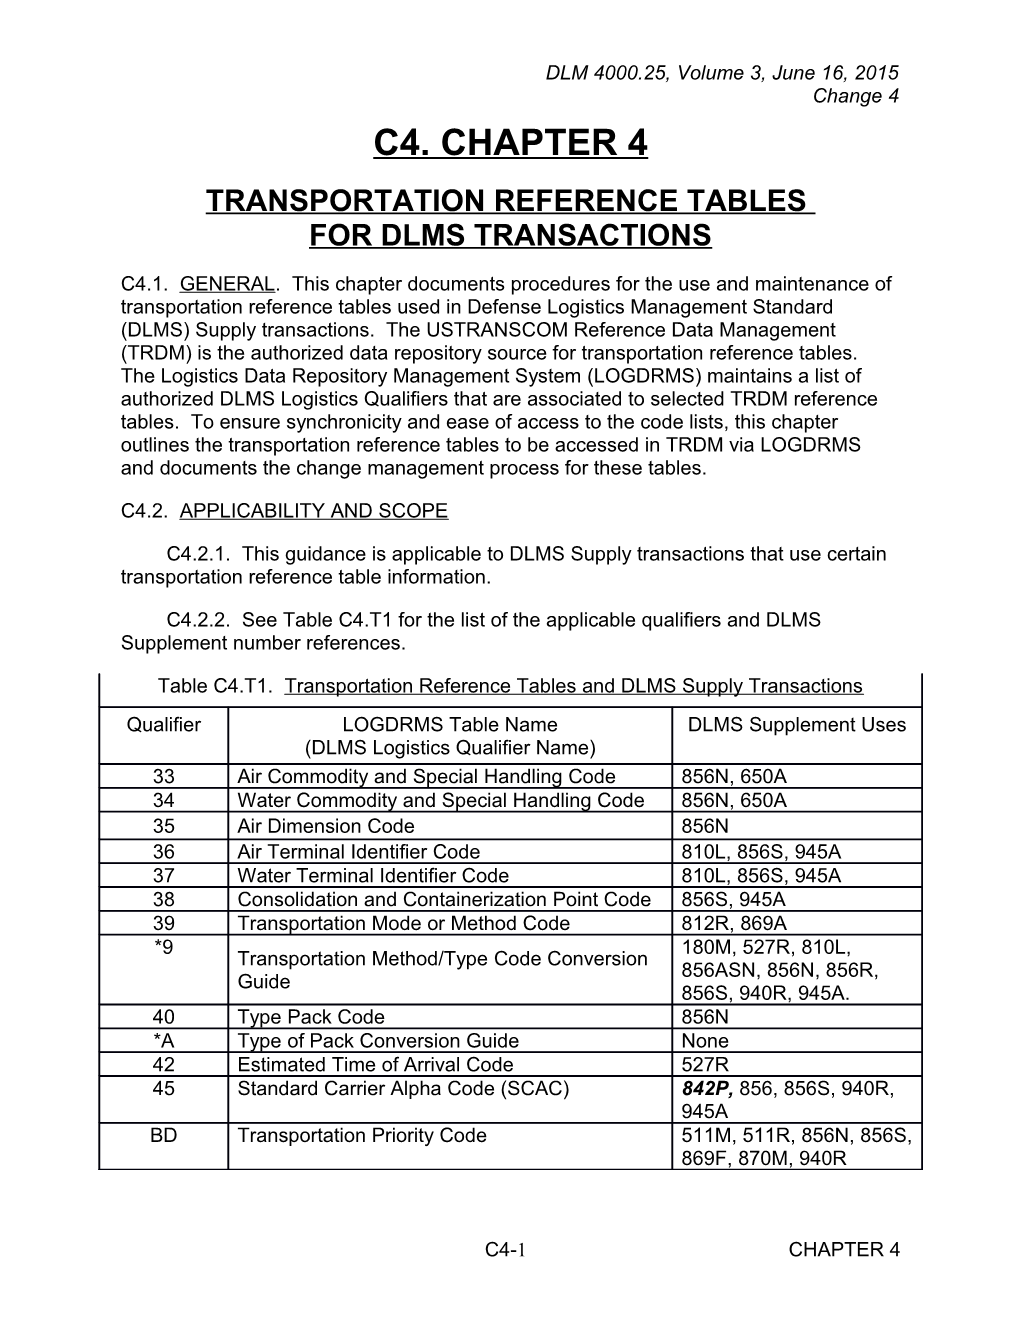 Chapter 4 - Transportation Reference Tables for DLMS Transactions